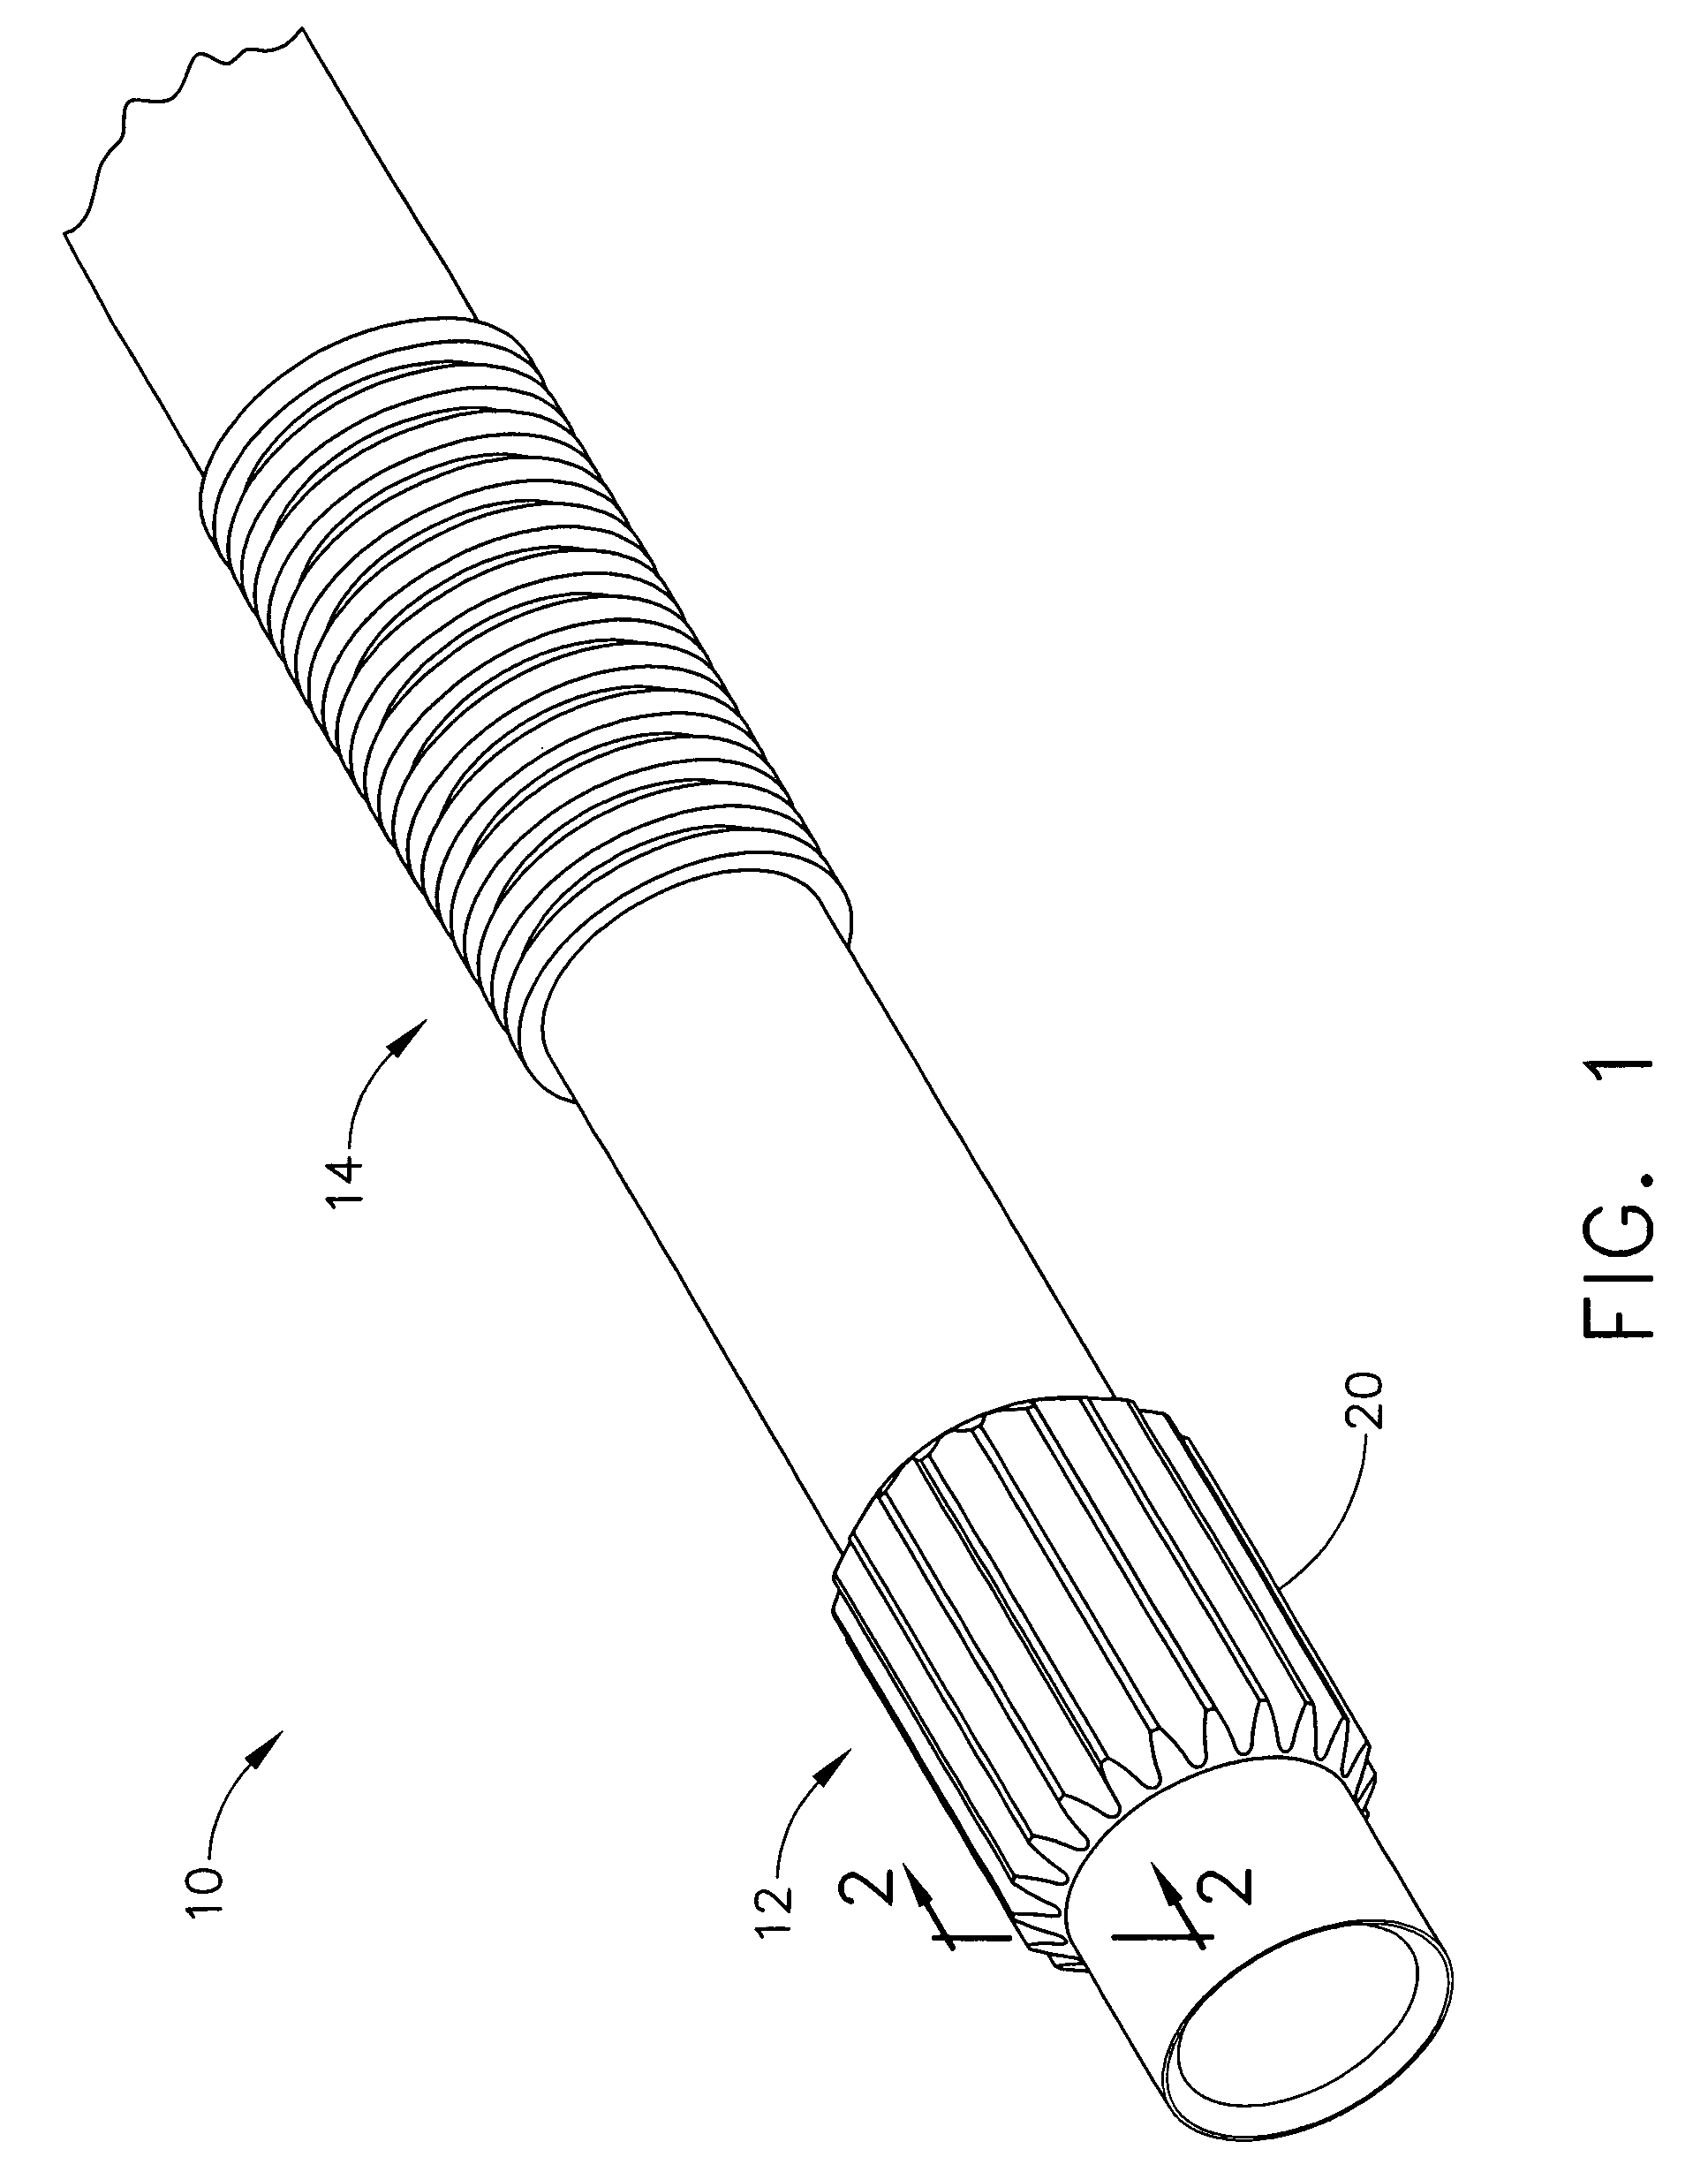 Method of repairing spline and seal teeth of a mated component